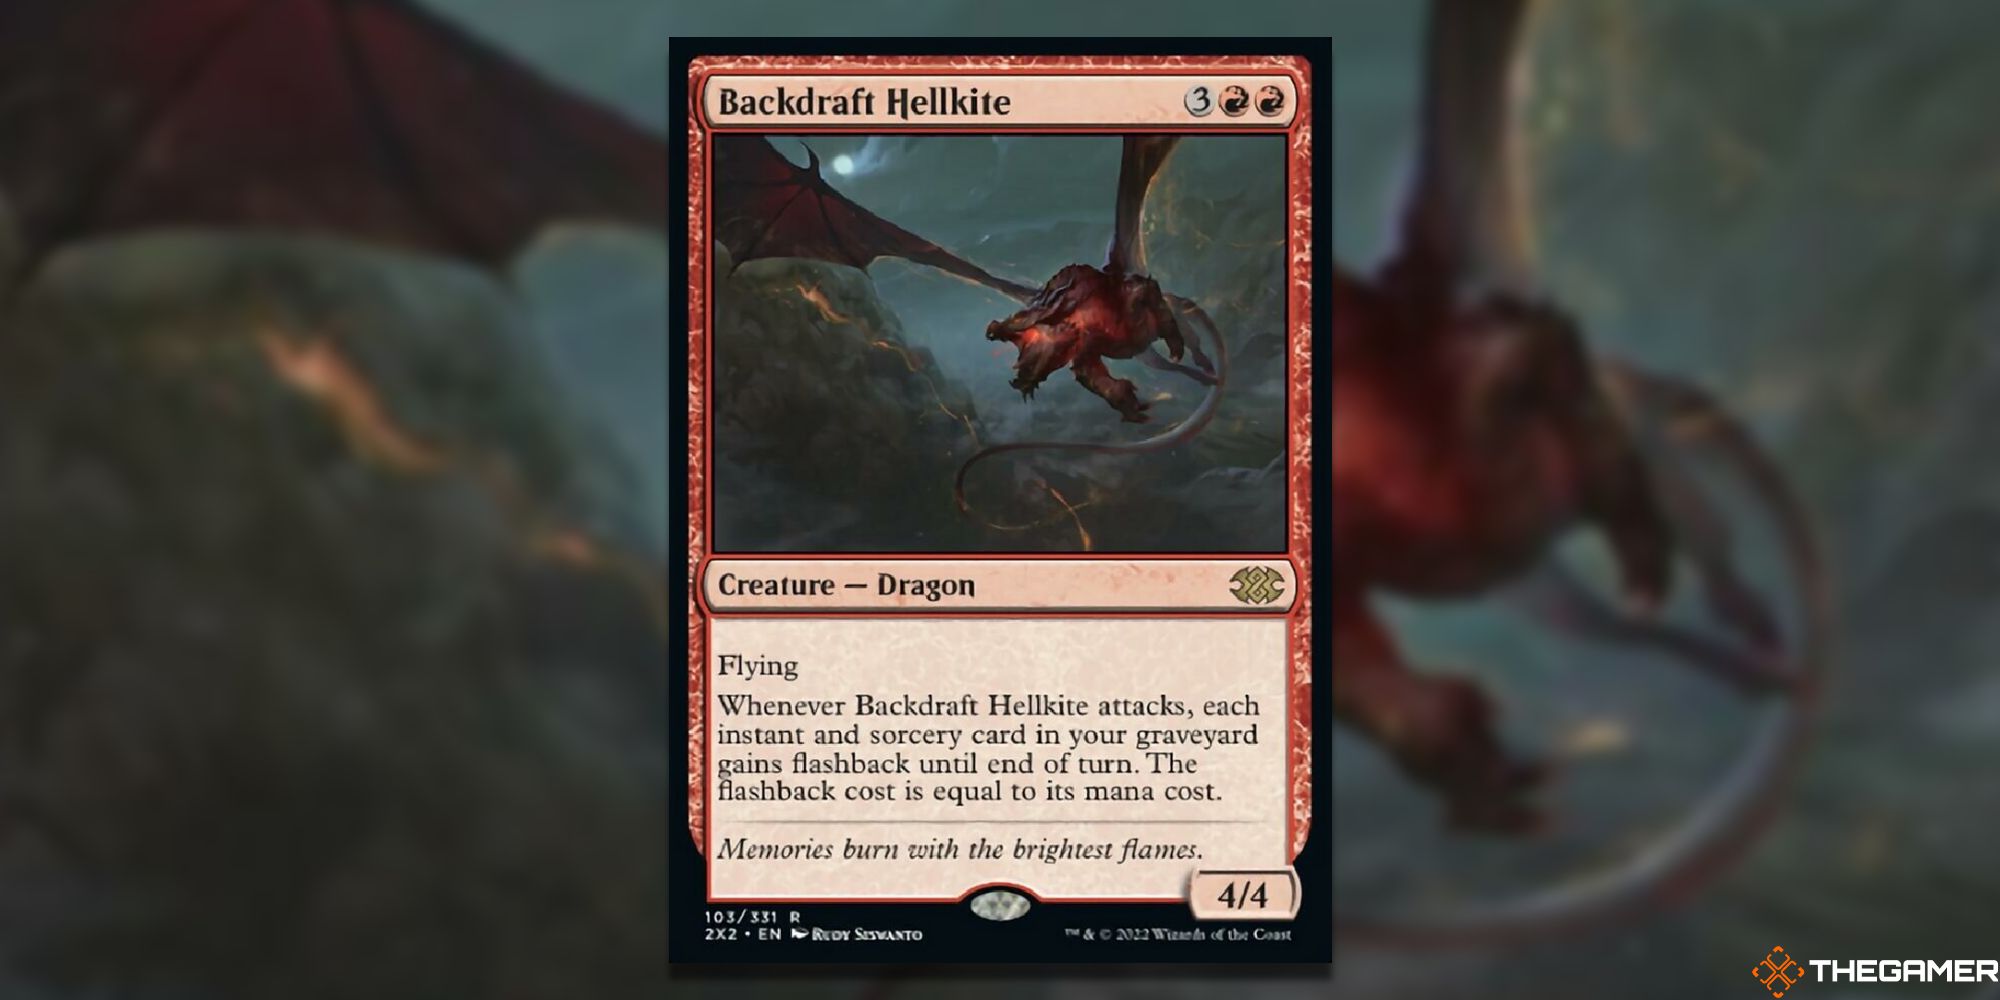 Magic: The Gathering Backdraft Hellkite full card with background